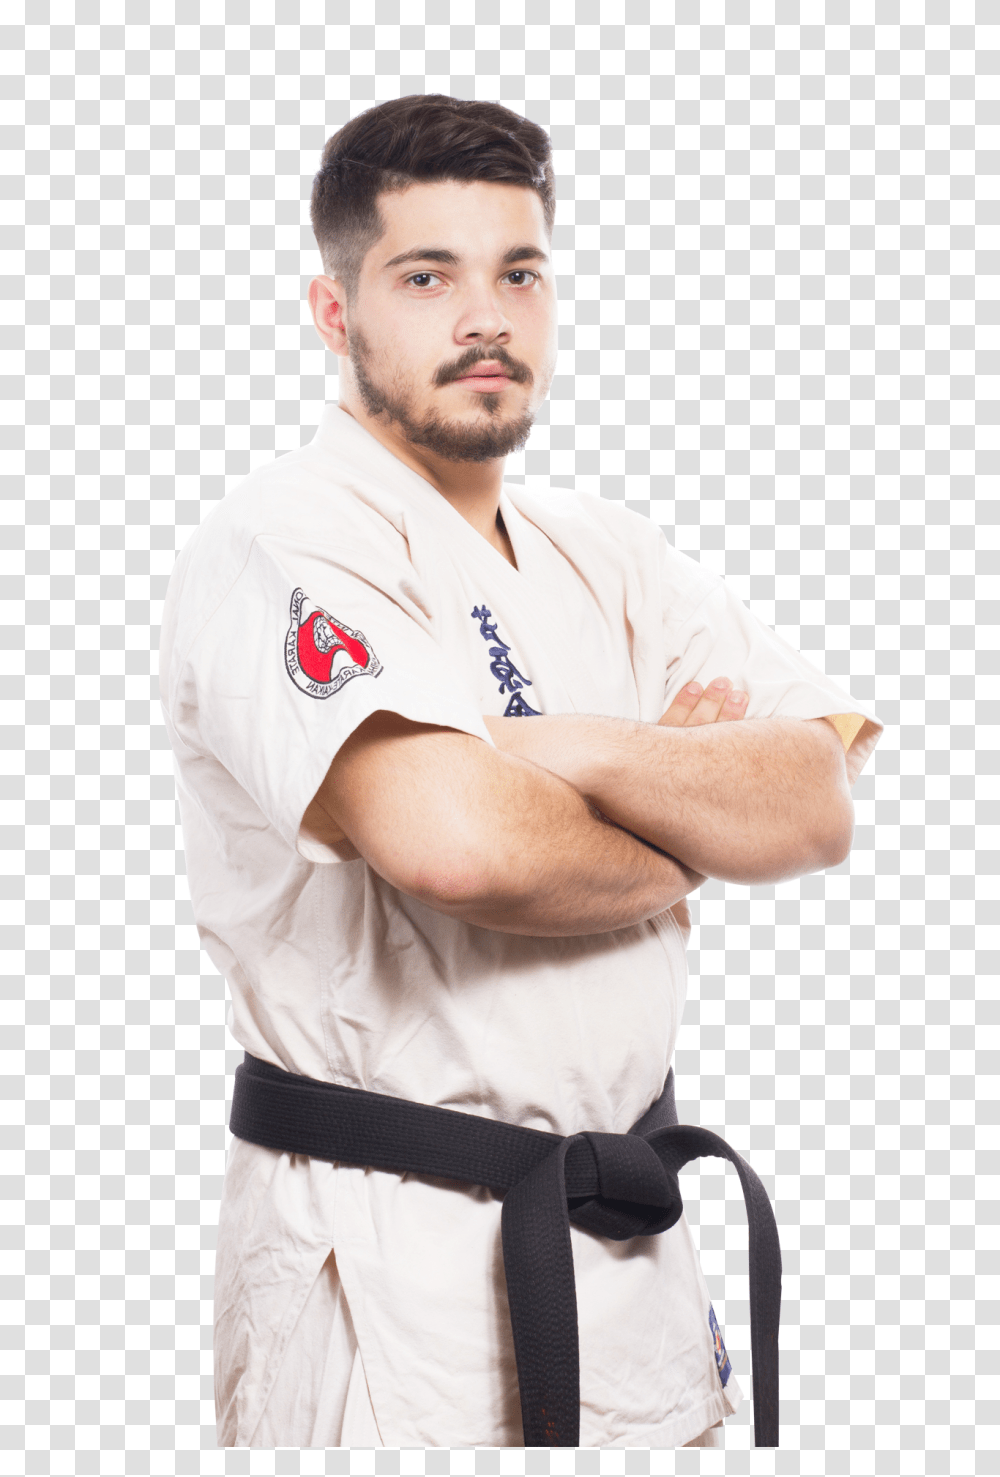 Karate Male Fighter In White Kimono And Black Belt Image, Person, People, Athlete Transparent Png